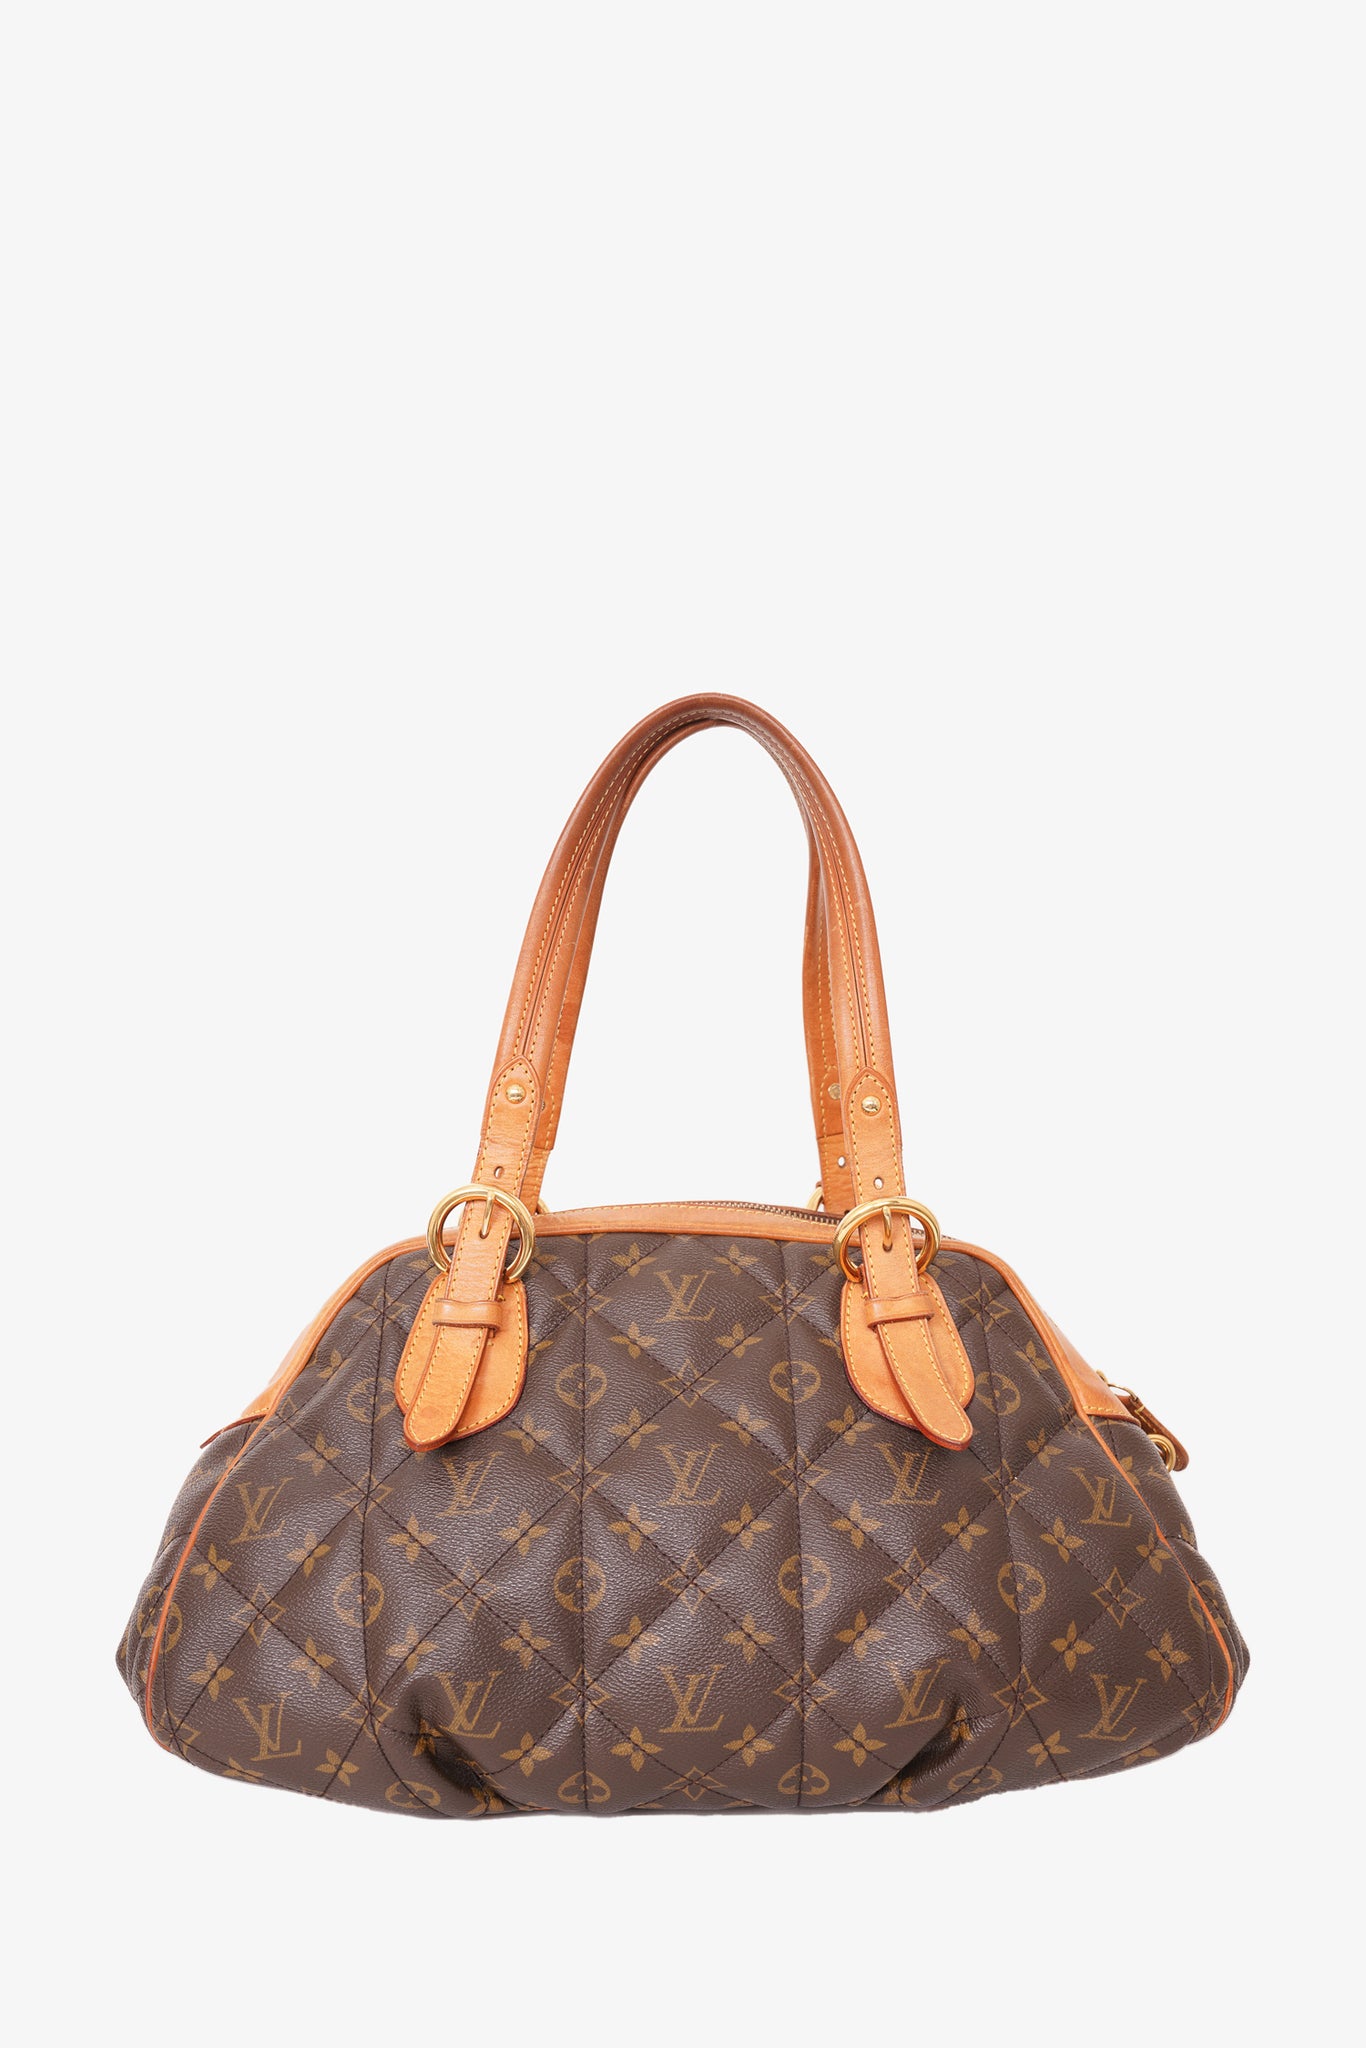 Louis Vuitton Noe Bag - clothing & accessories - by owner - apparel sale -  craigslist